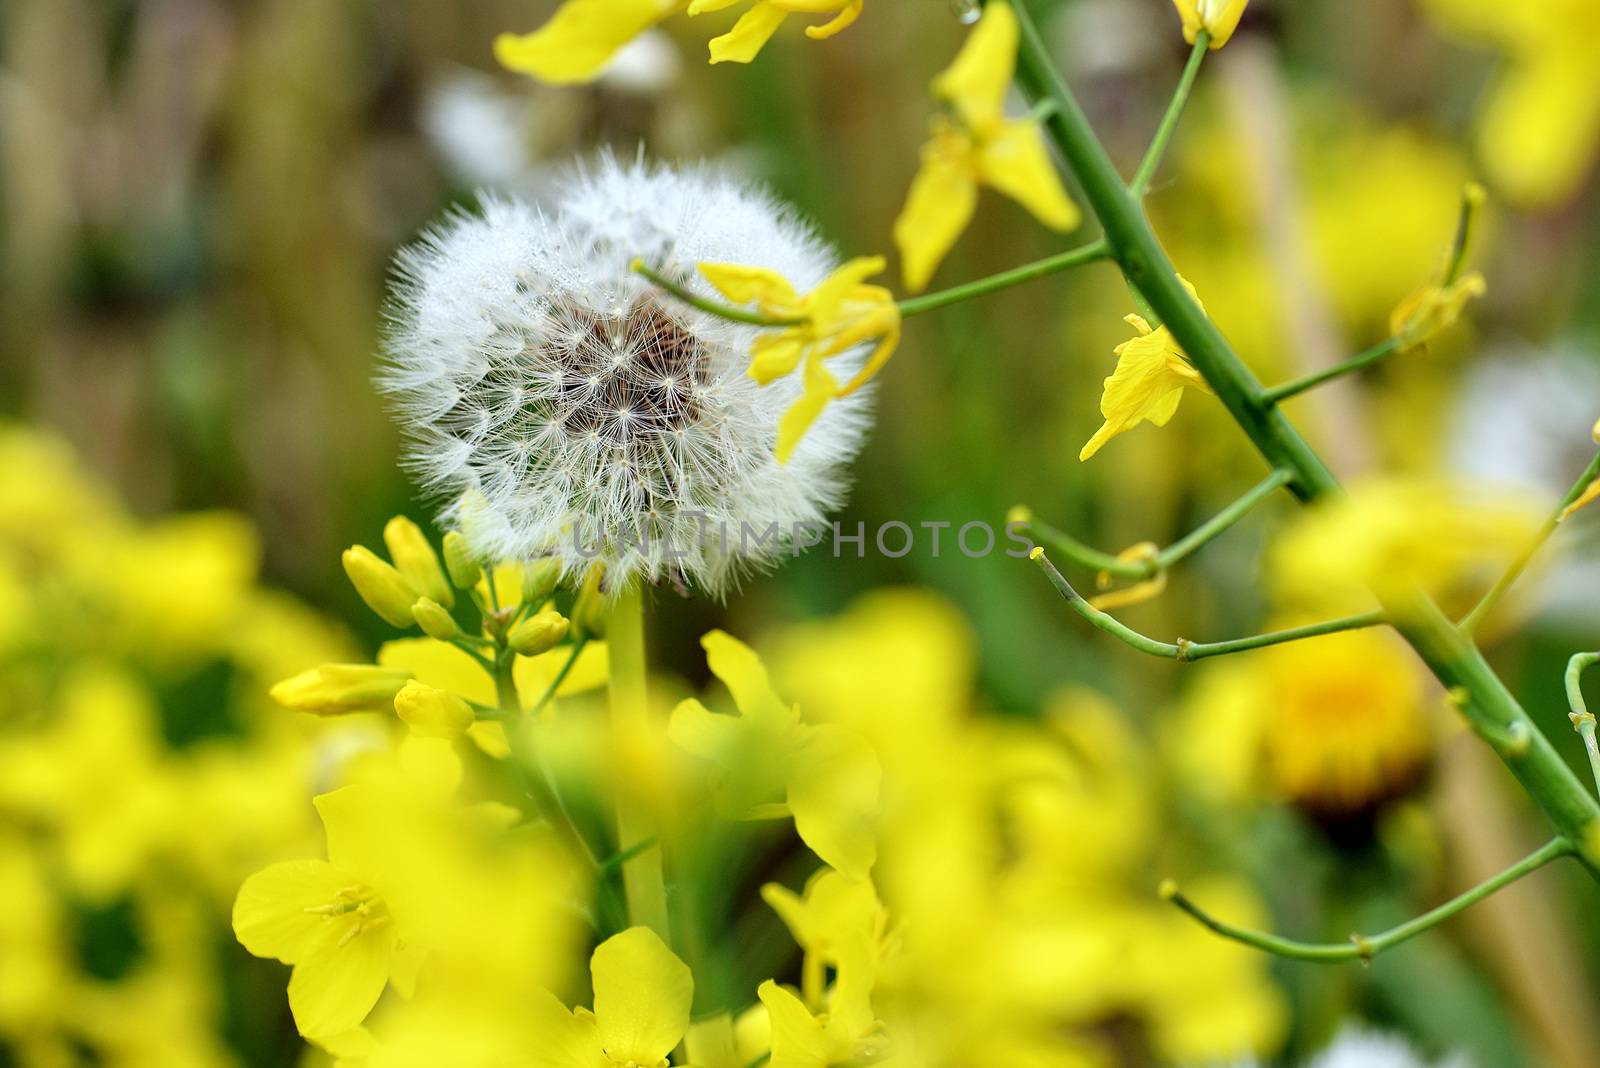 Selective focus close-up photography. It is flowering dandelion with white fuzz growing canola field. by askoldsb